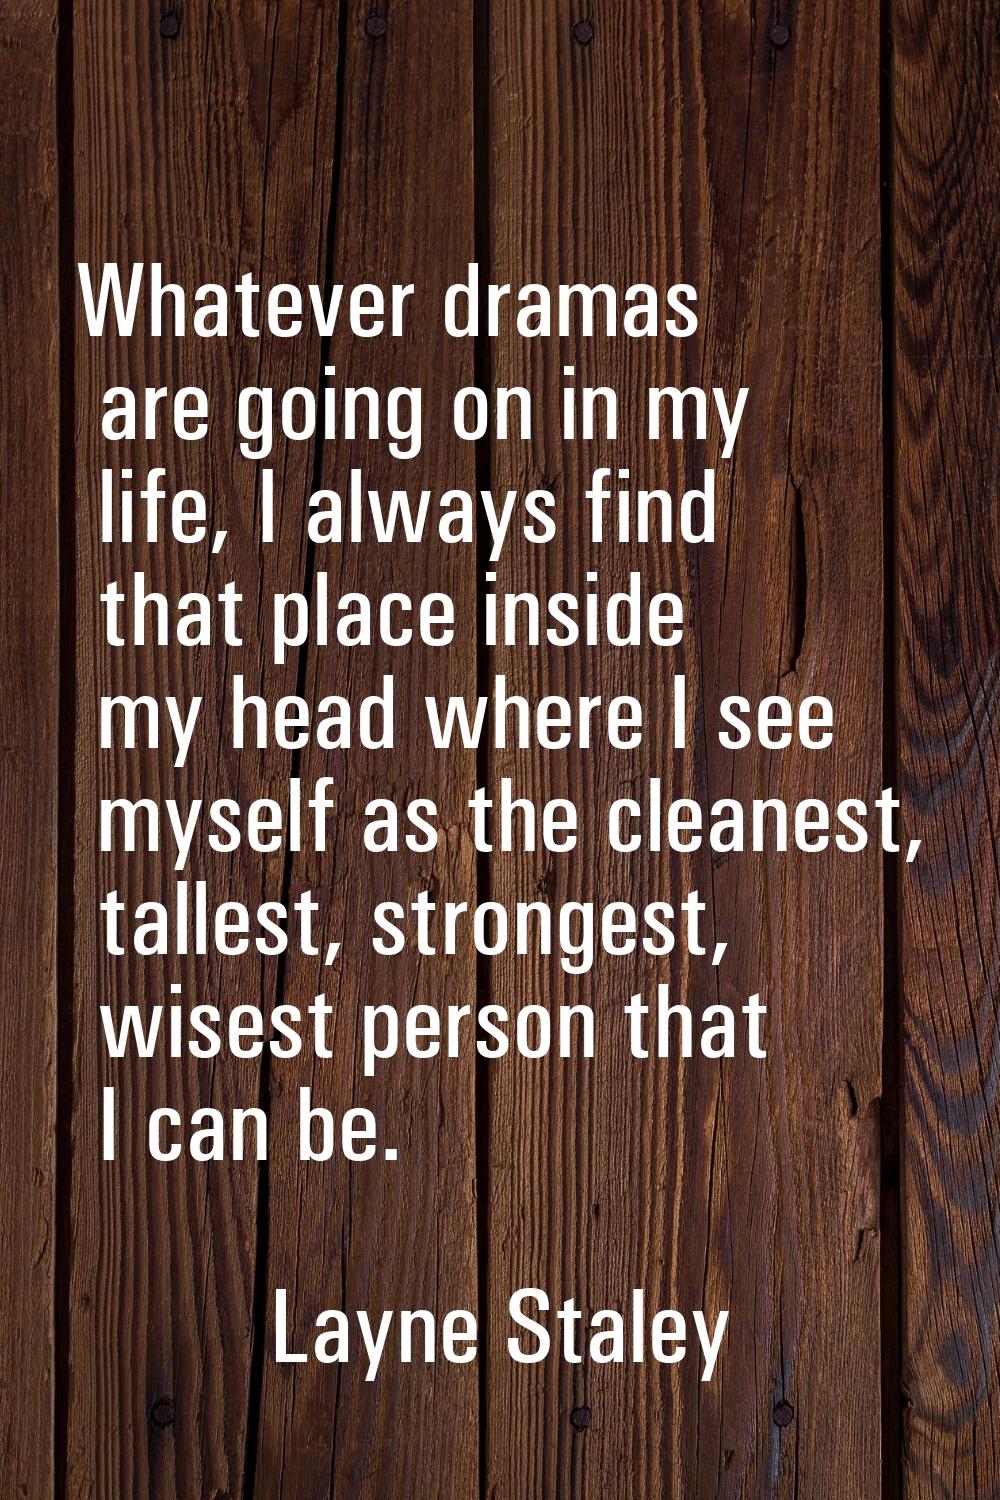 Whatever dramas are going on in my life, I always find that place inside my head where I see myself